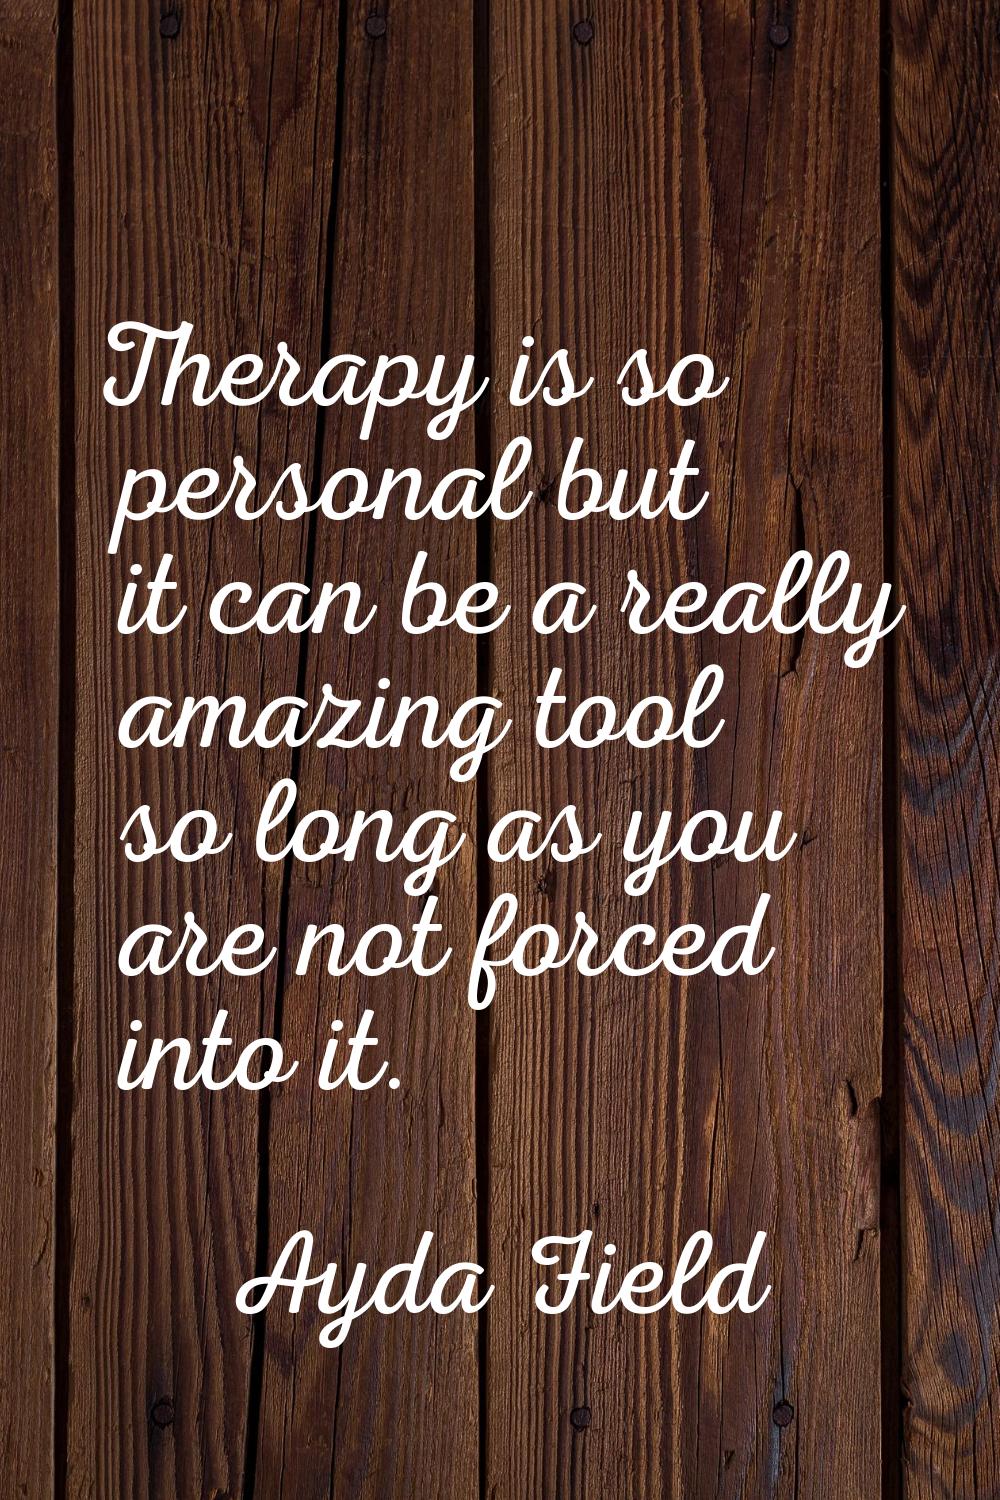 Therapy is so personal but it can be a really amazing tool so long as you are not forced into it.